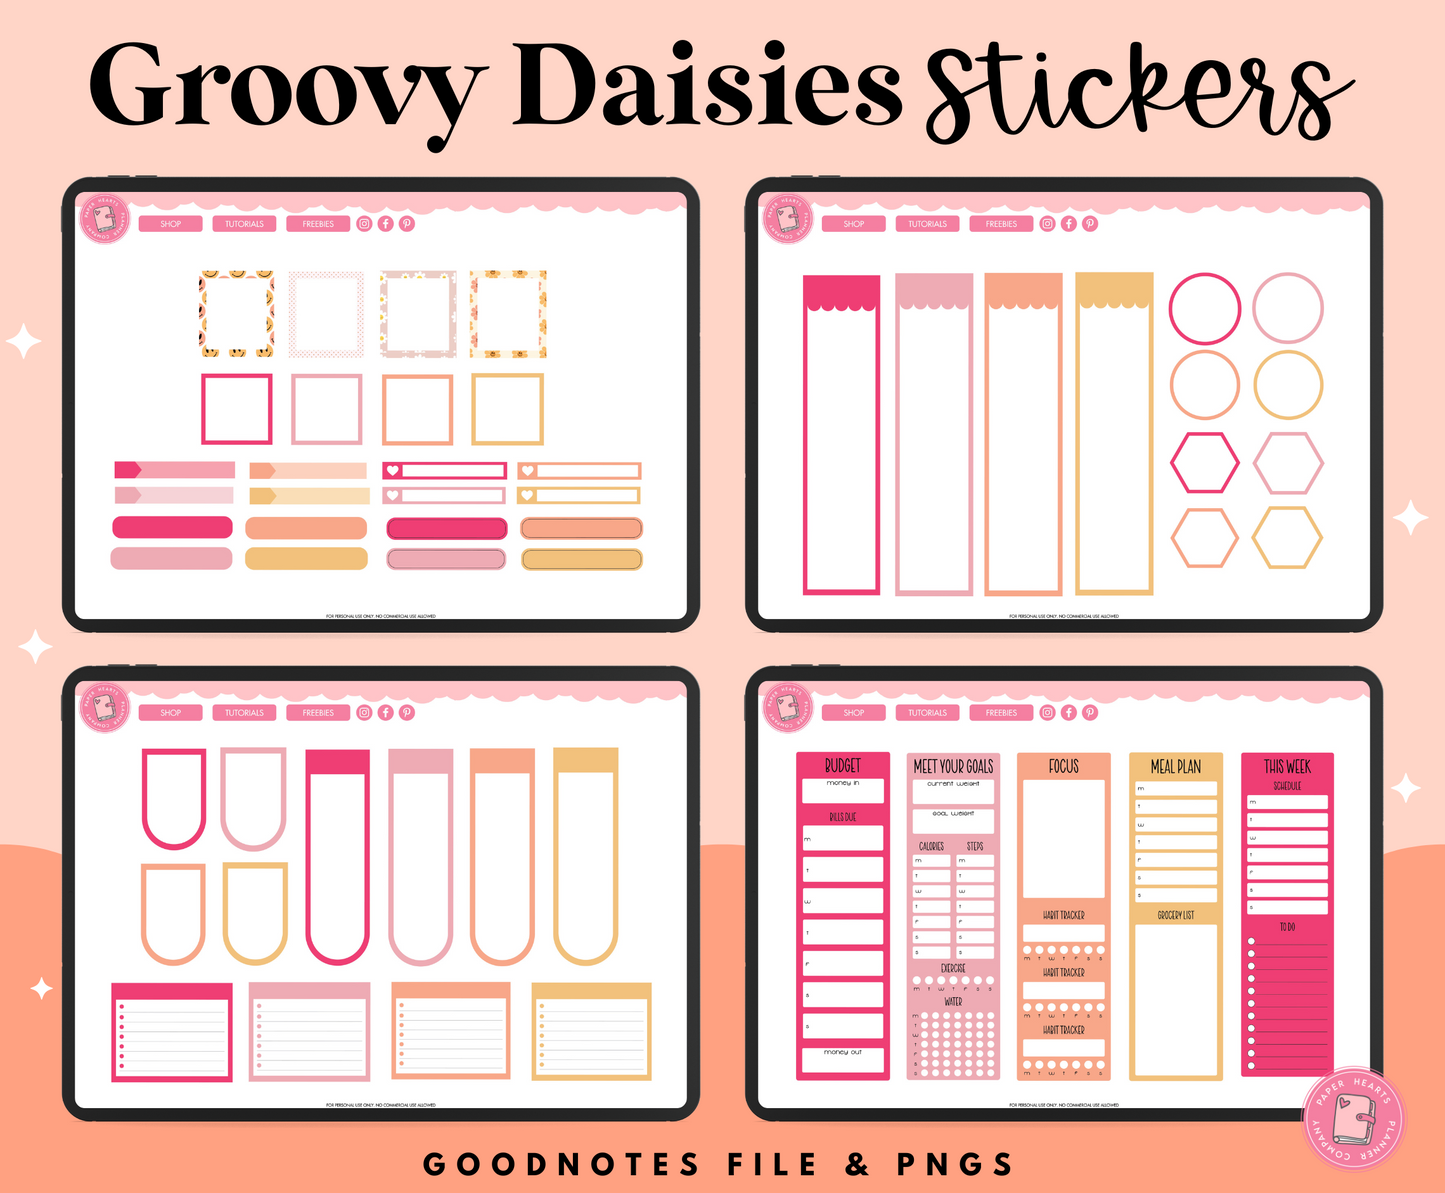 Groovy Daisies Stickers